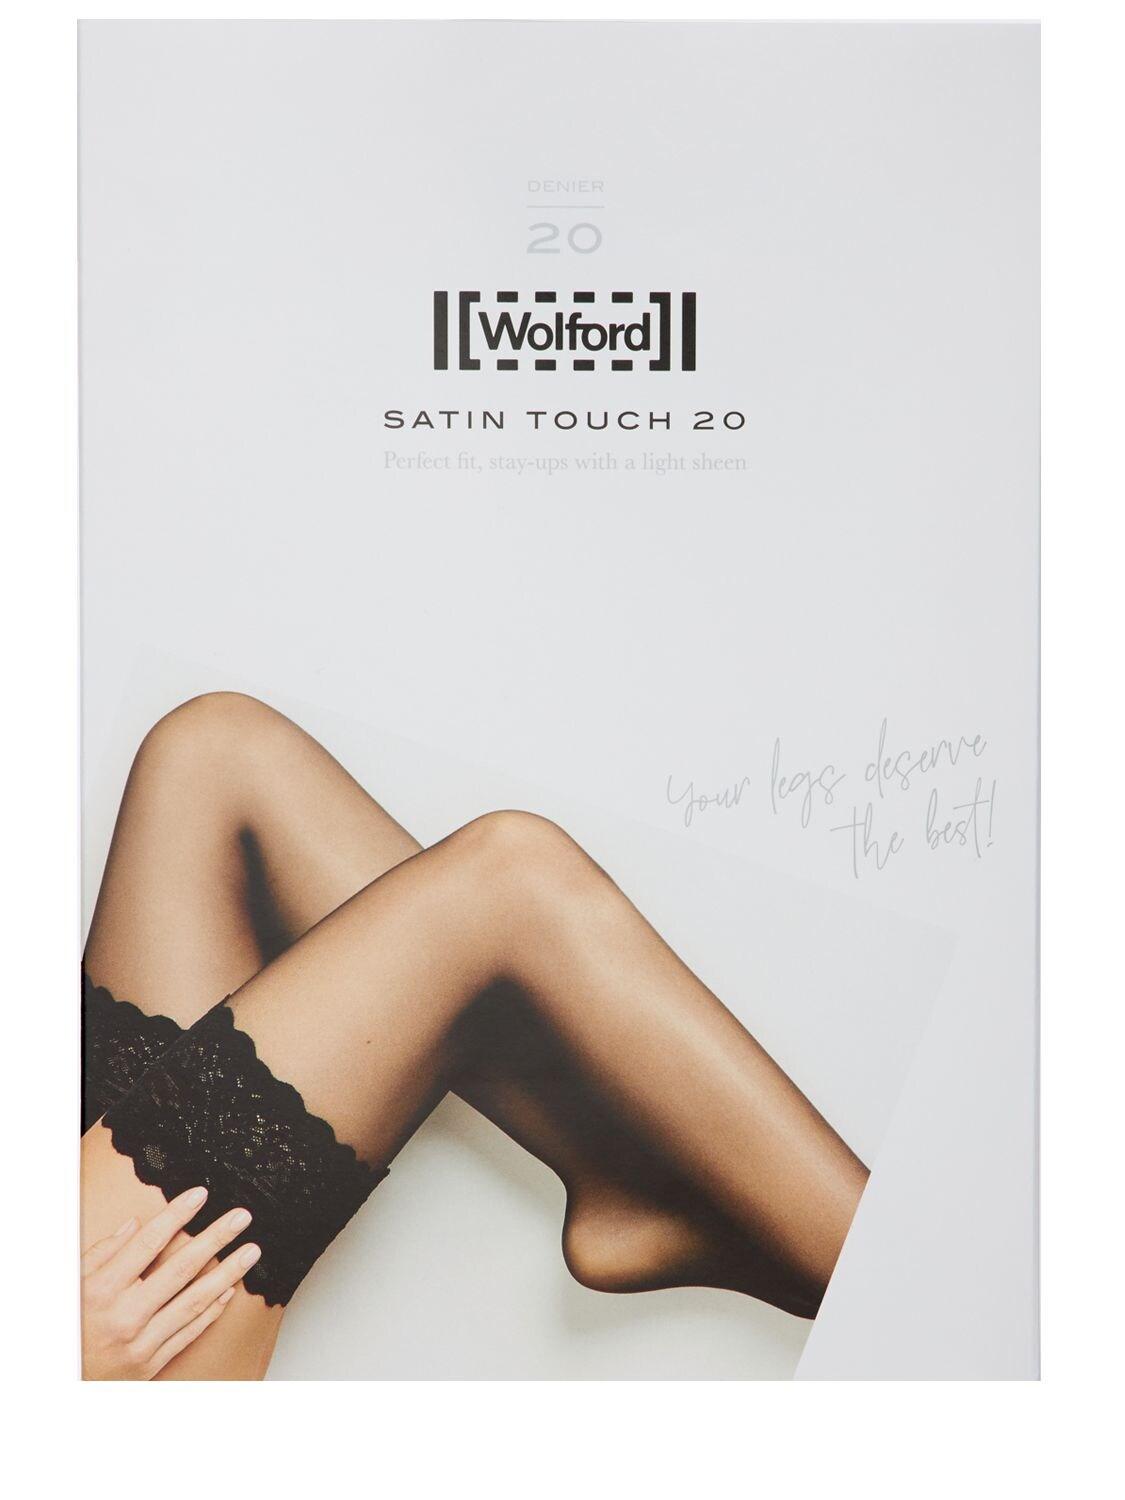 clearance discounts Wolford Touch 20 Denier Stayup Satin Thigh Highs  Little-known -senfinances.sn